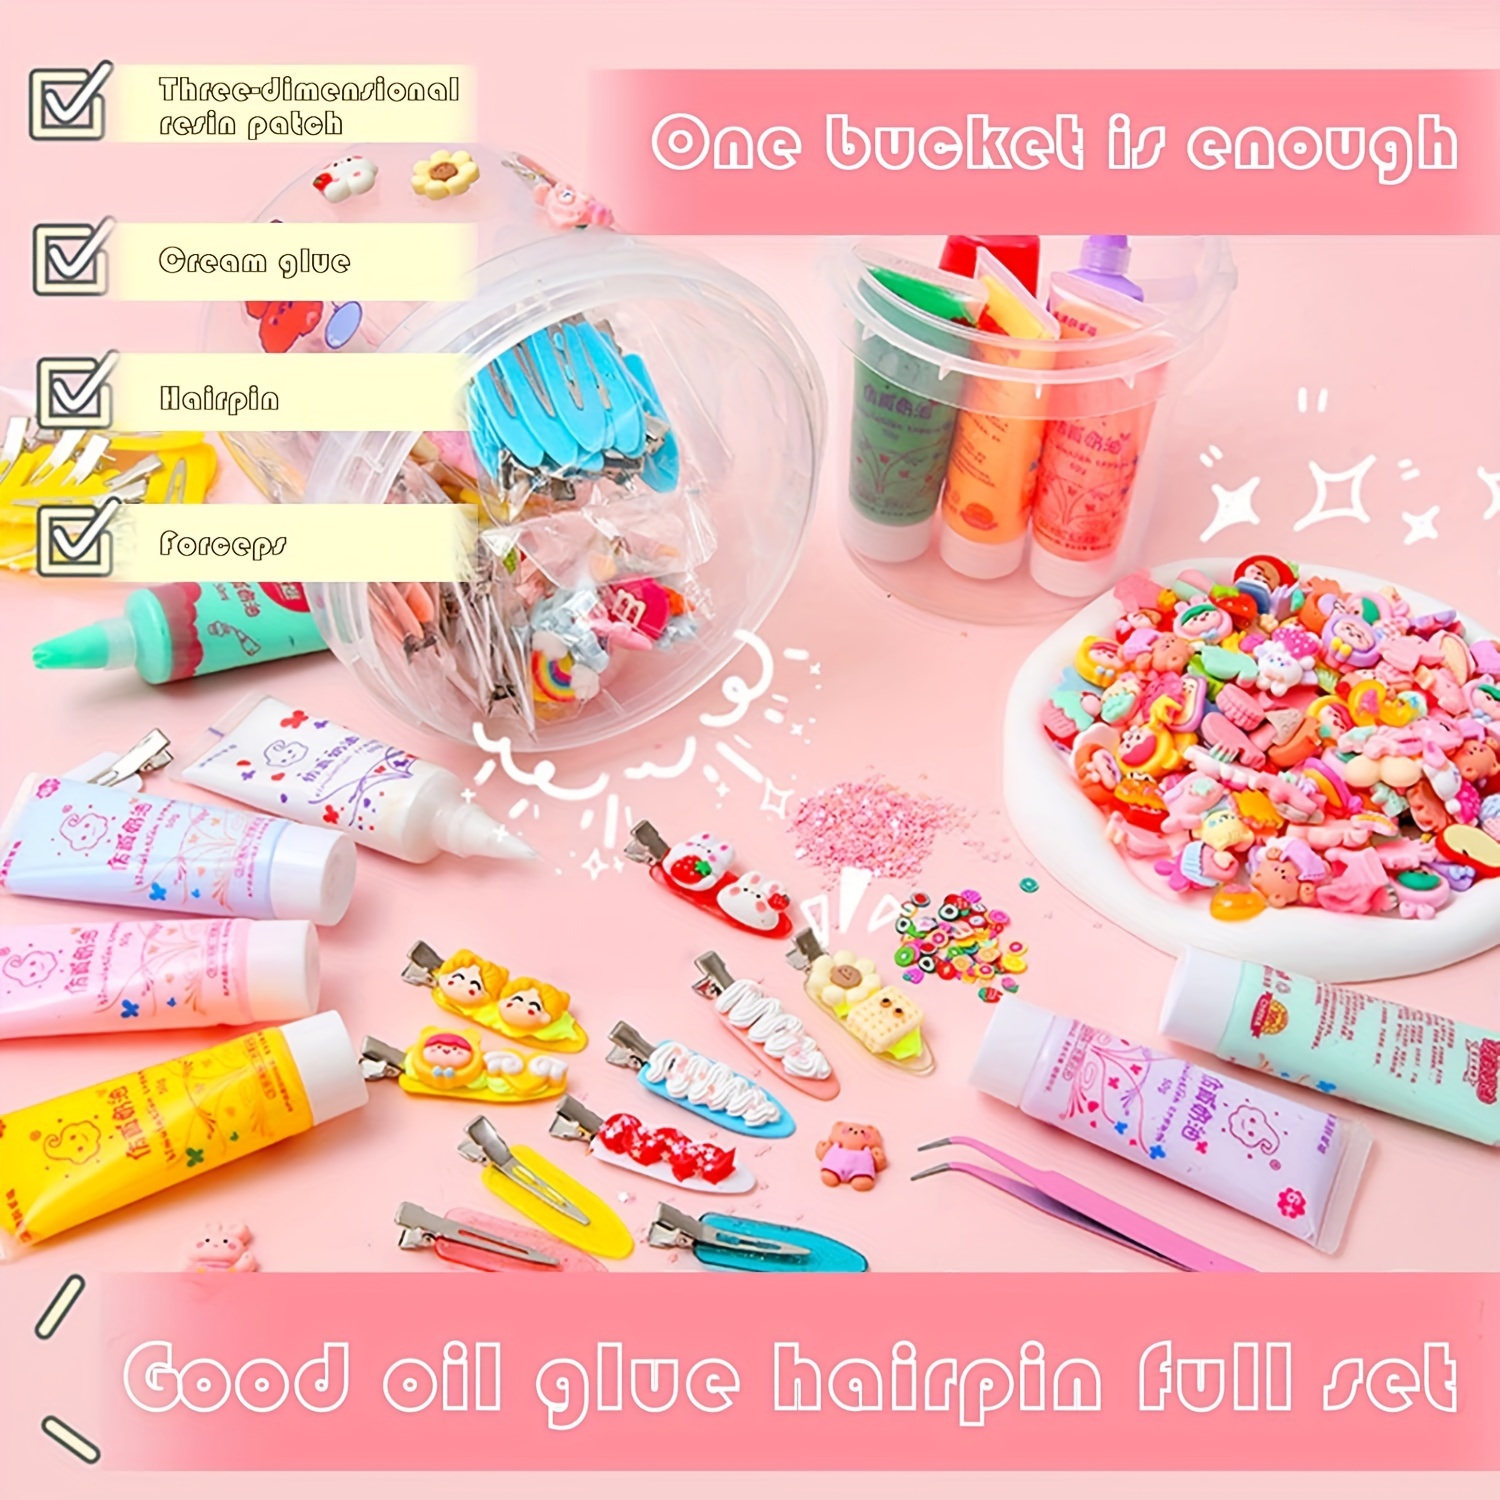 BEIJITA Whipped Cream Glue Kit - Decoden Cream Set with 10 Colors (15ml  Each), Perfect for Crafting and Decorating,Ideal for DIY Crafts and